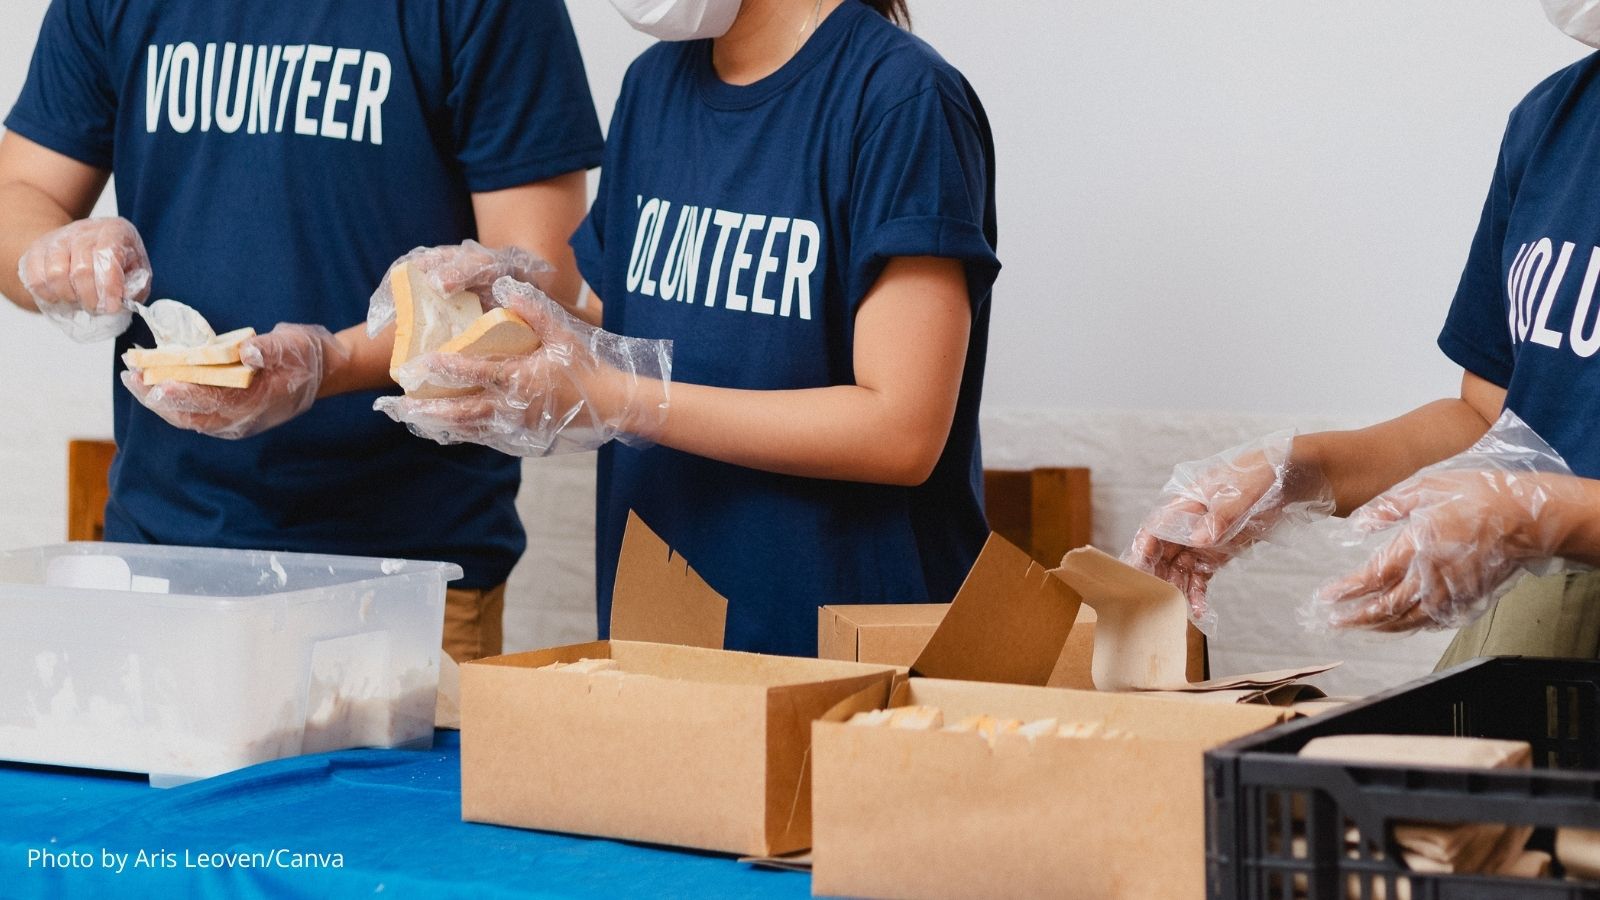 A photo of volunteers making sandwiches and putting them in boxed lunch kits.